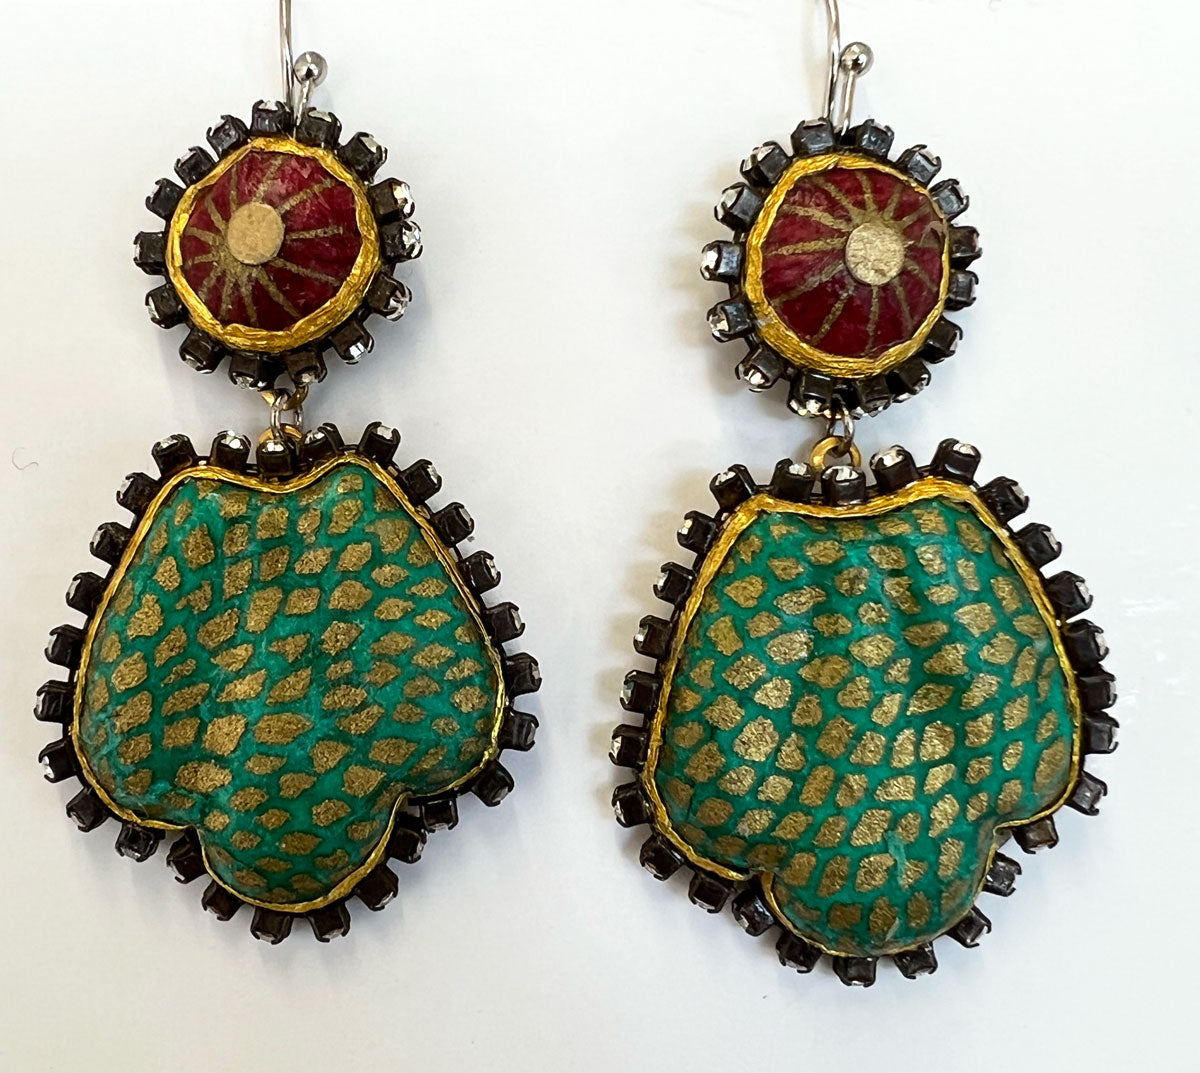 126. Scallop Dangle Red & Turquoise Earring